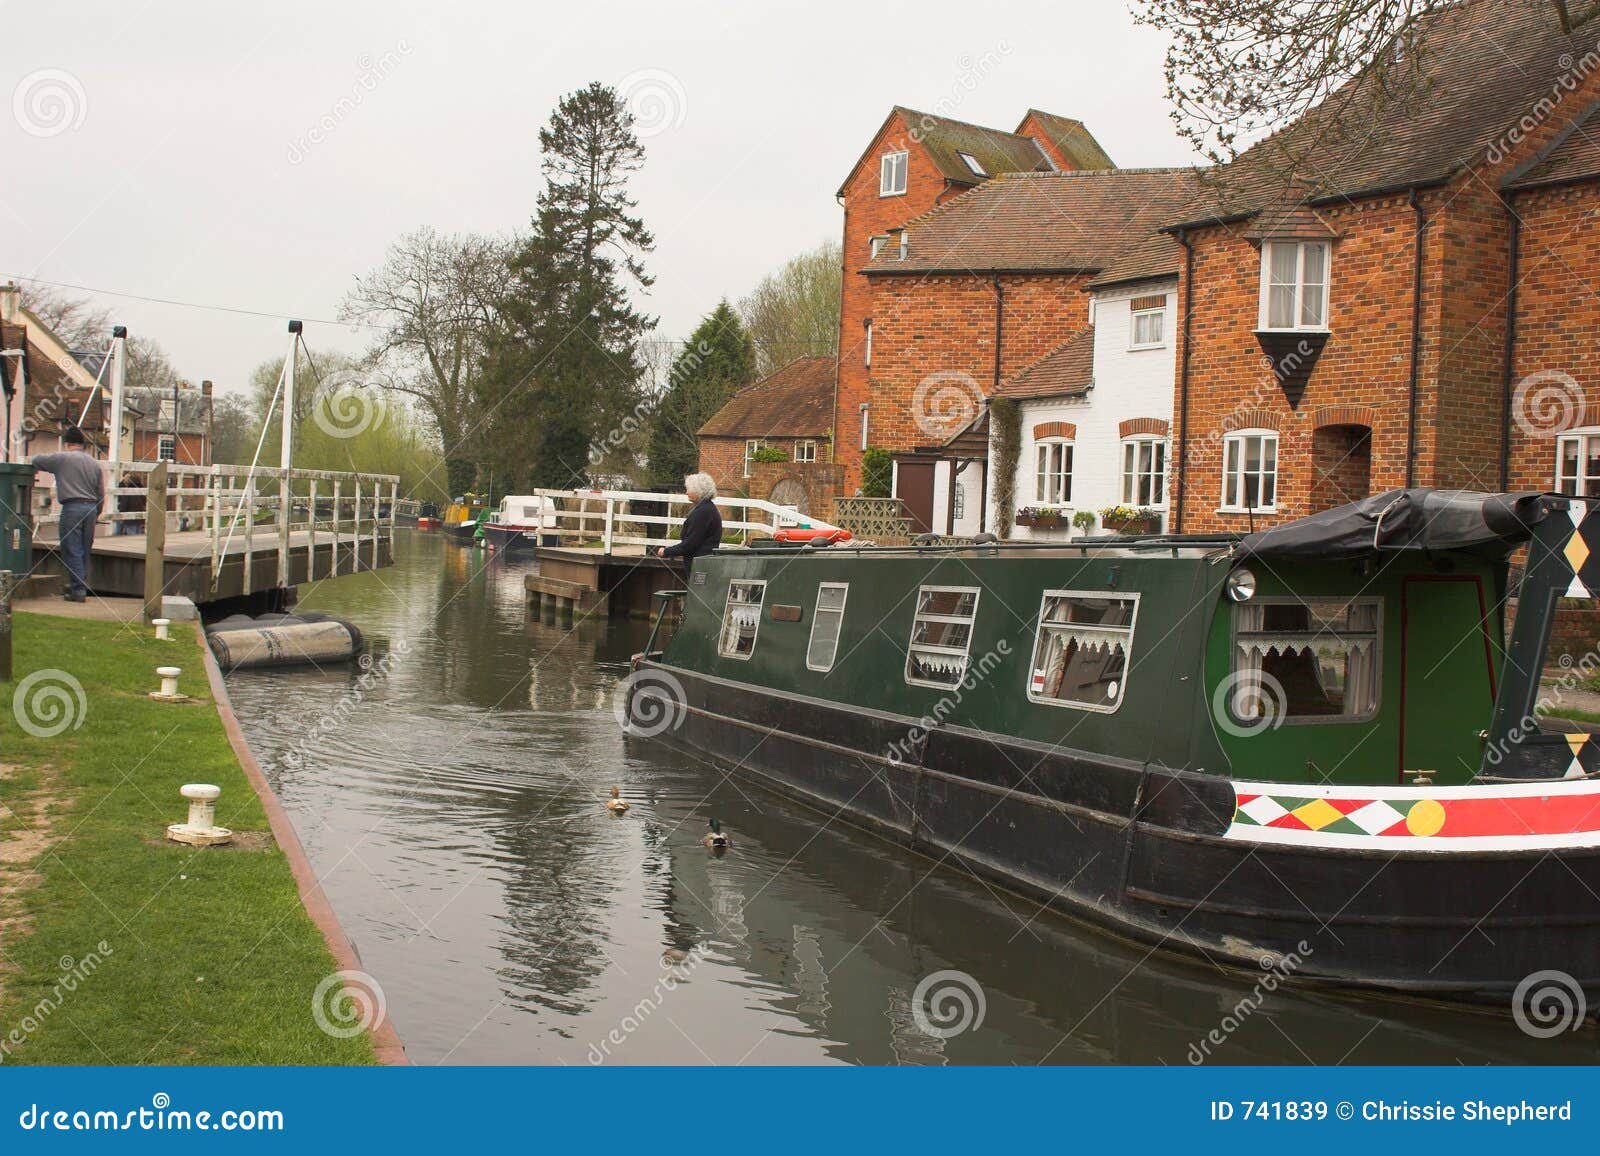 Royalty Free Stock Images: Green canal boat